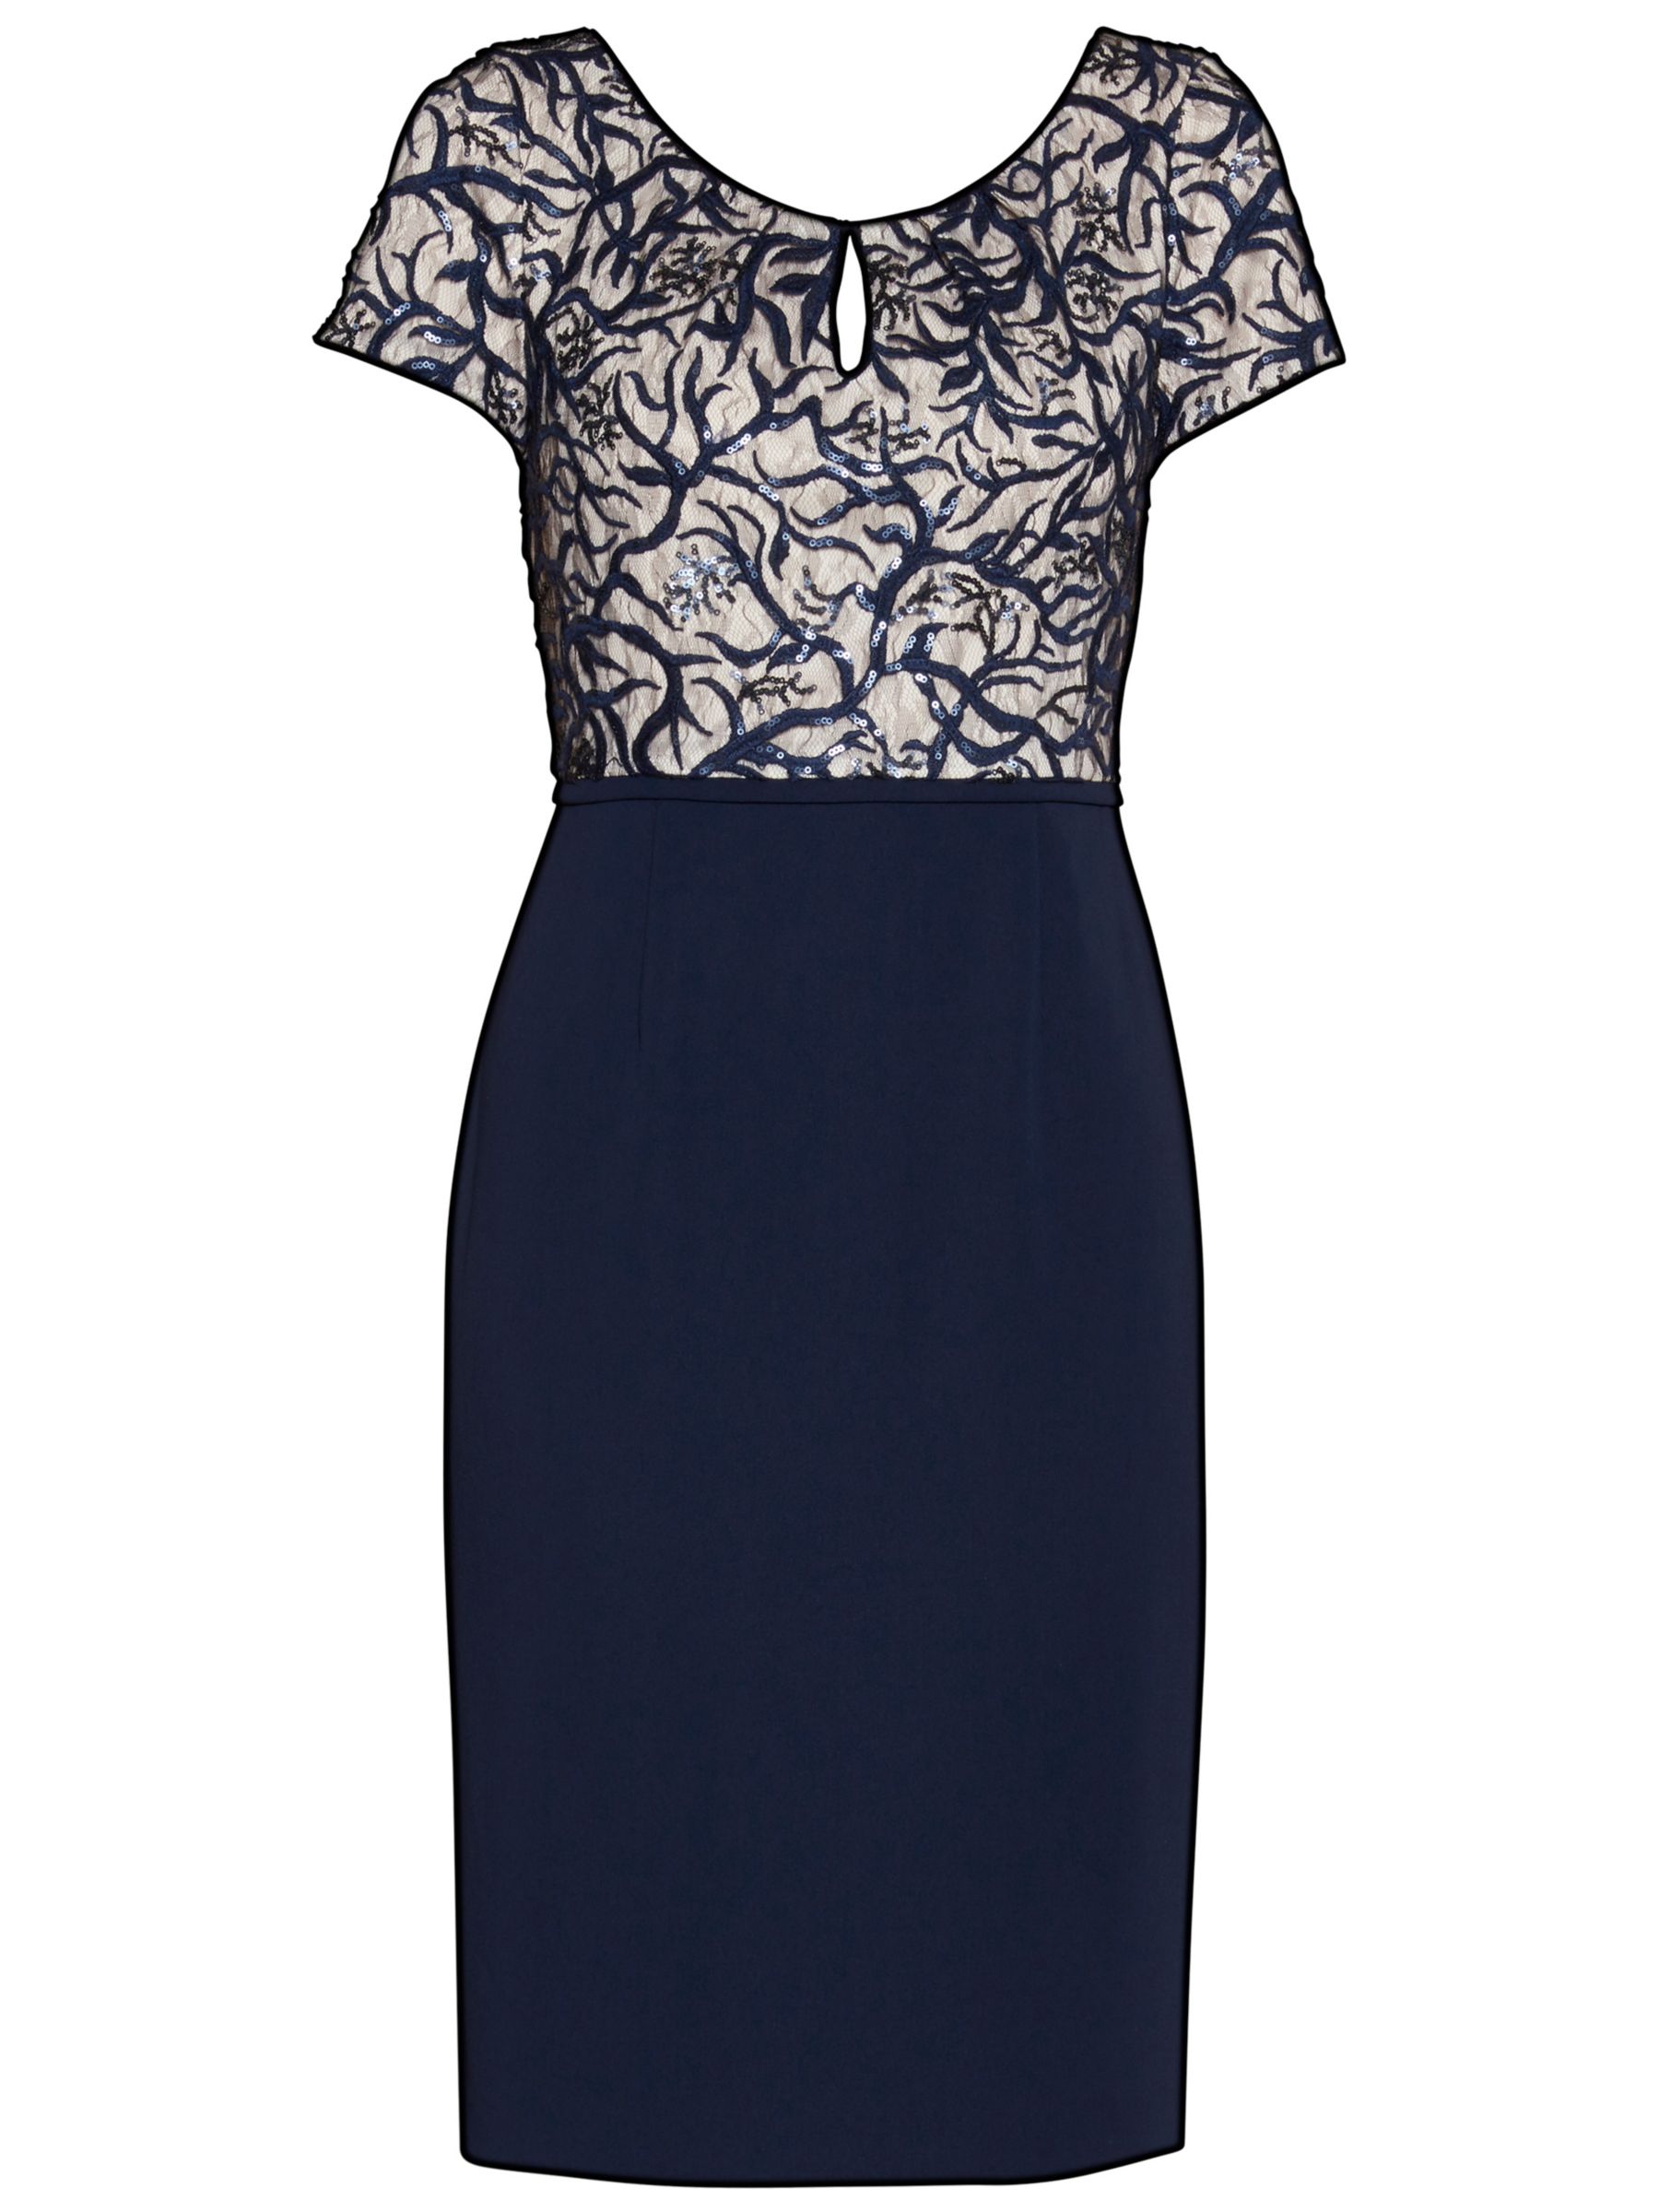 Gina Bacconi Embroidered Sequin Bodice Dress, Spring Navy at John Lewis ...